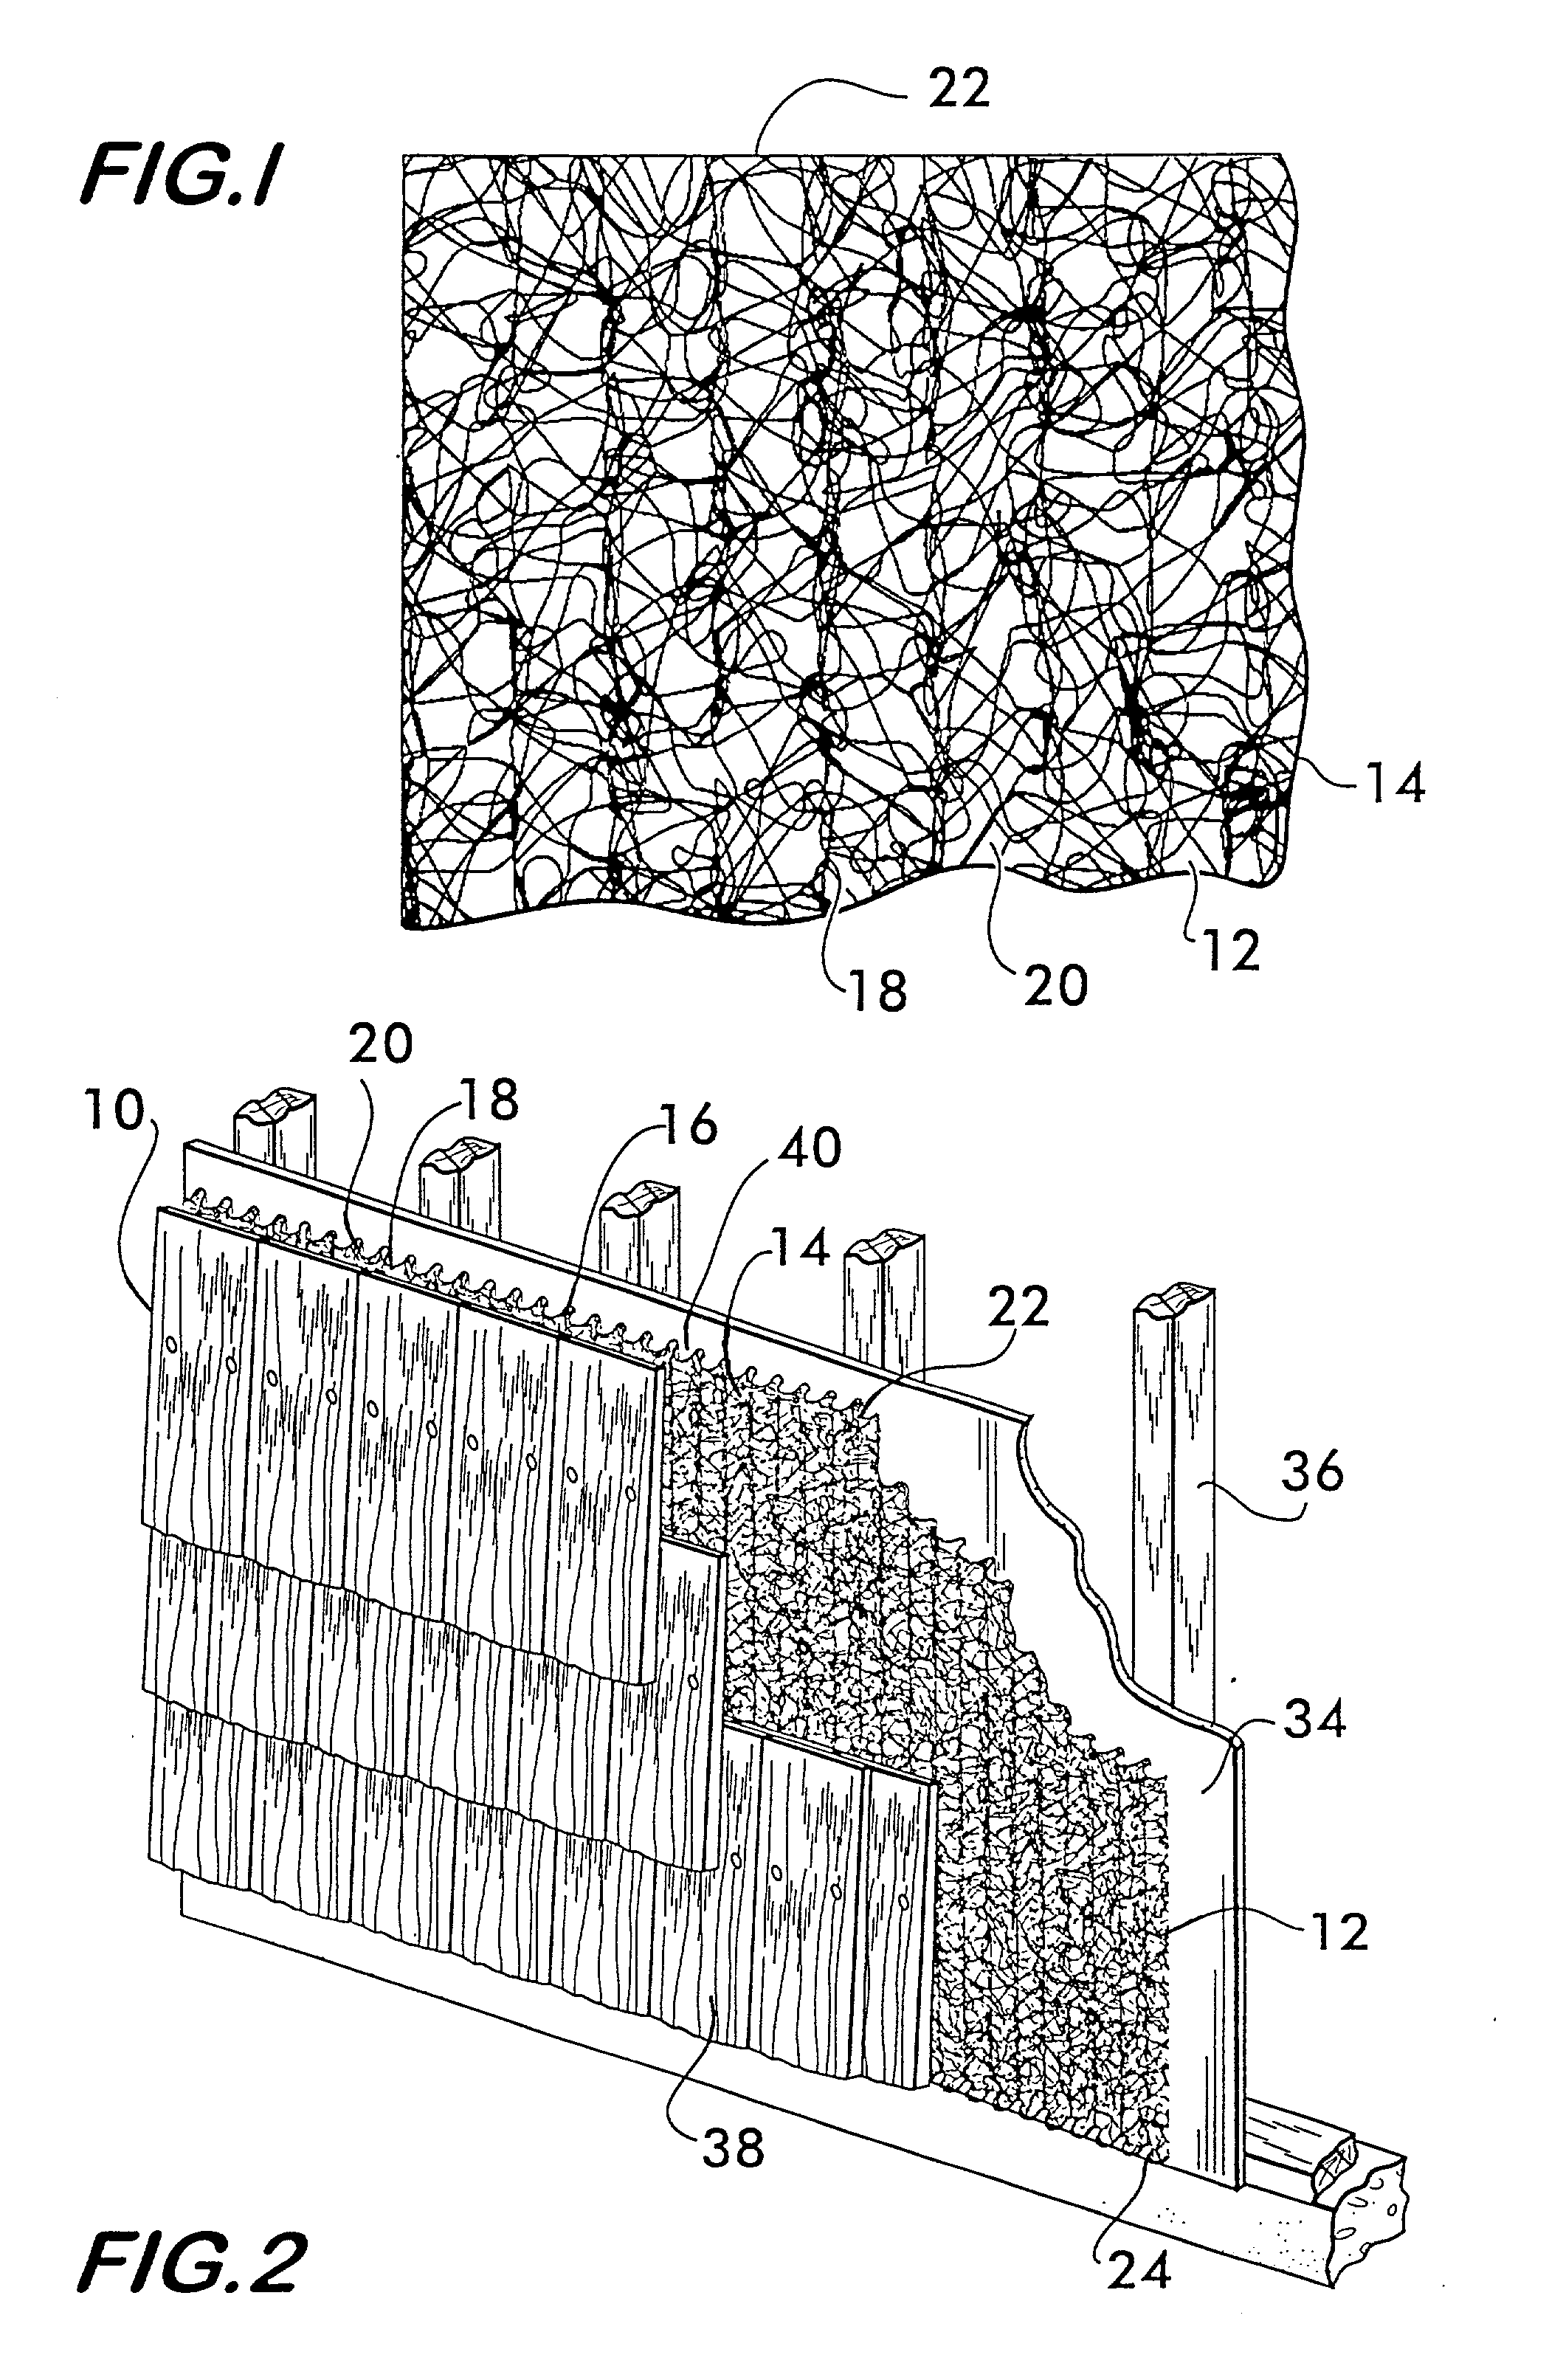 Spacer for providing drainage passageways within building structures